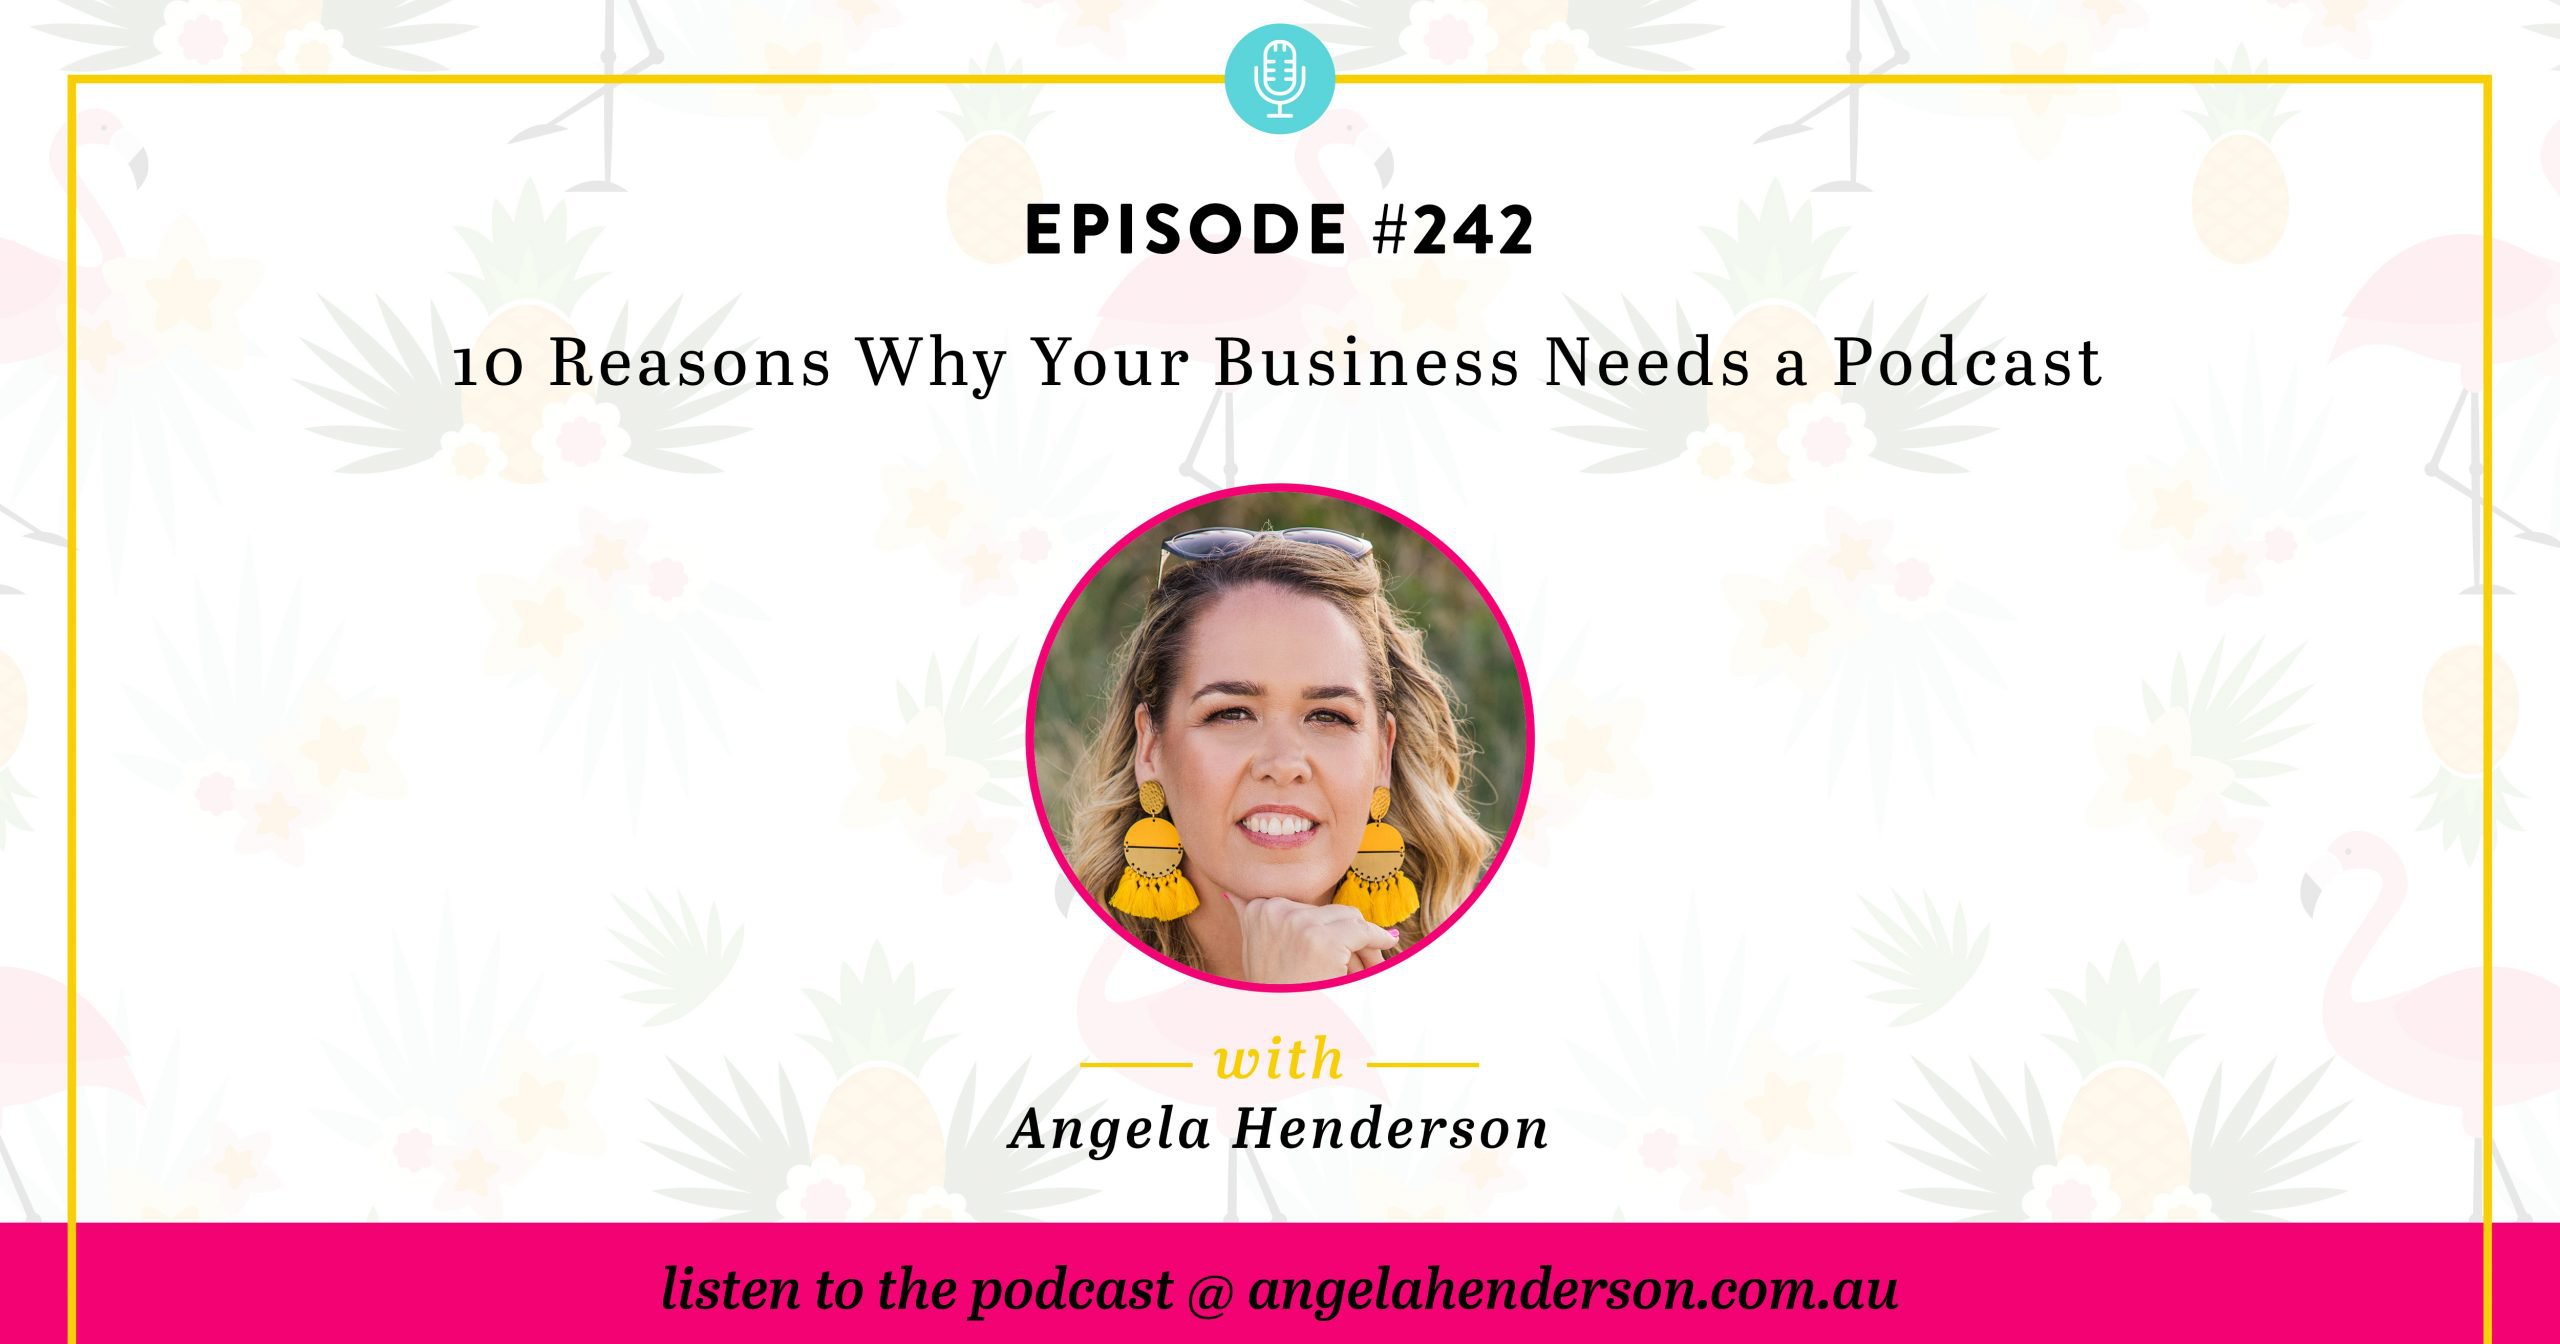 10 Reasons Why Your Business Needs a Podcast